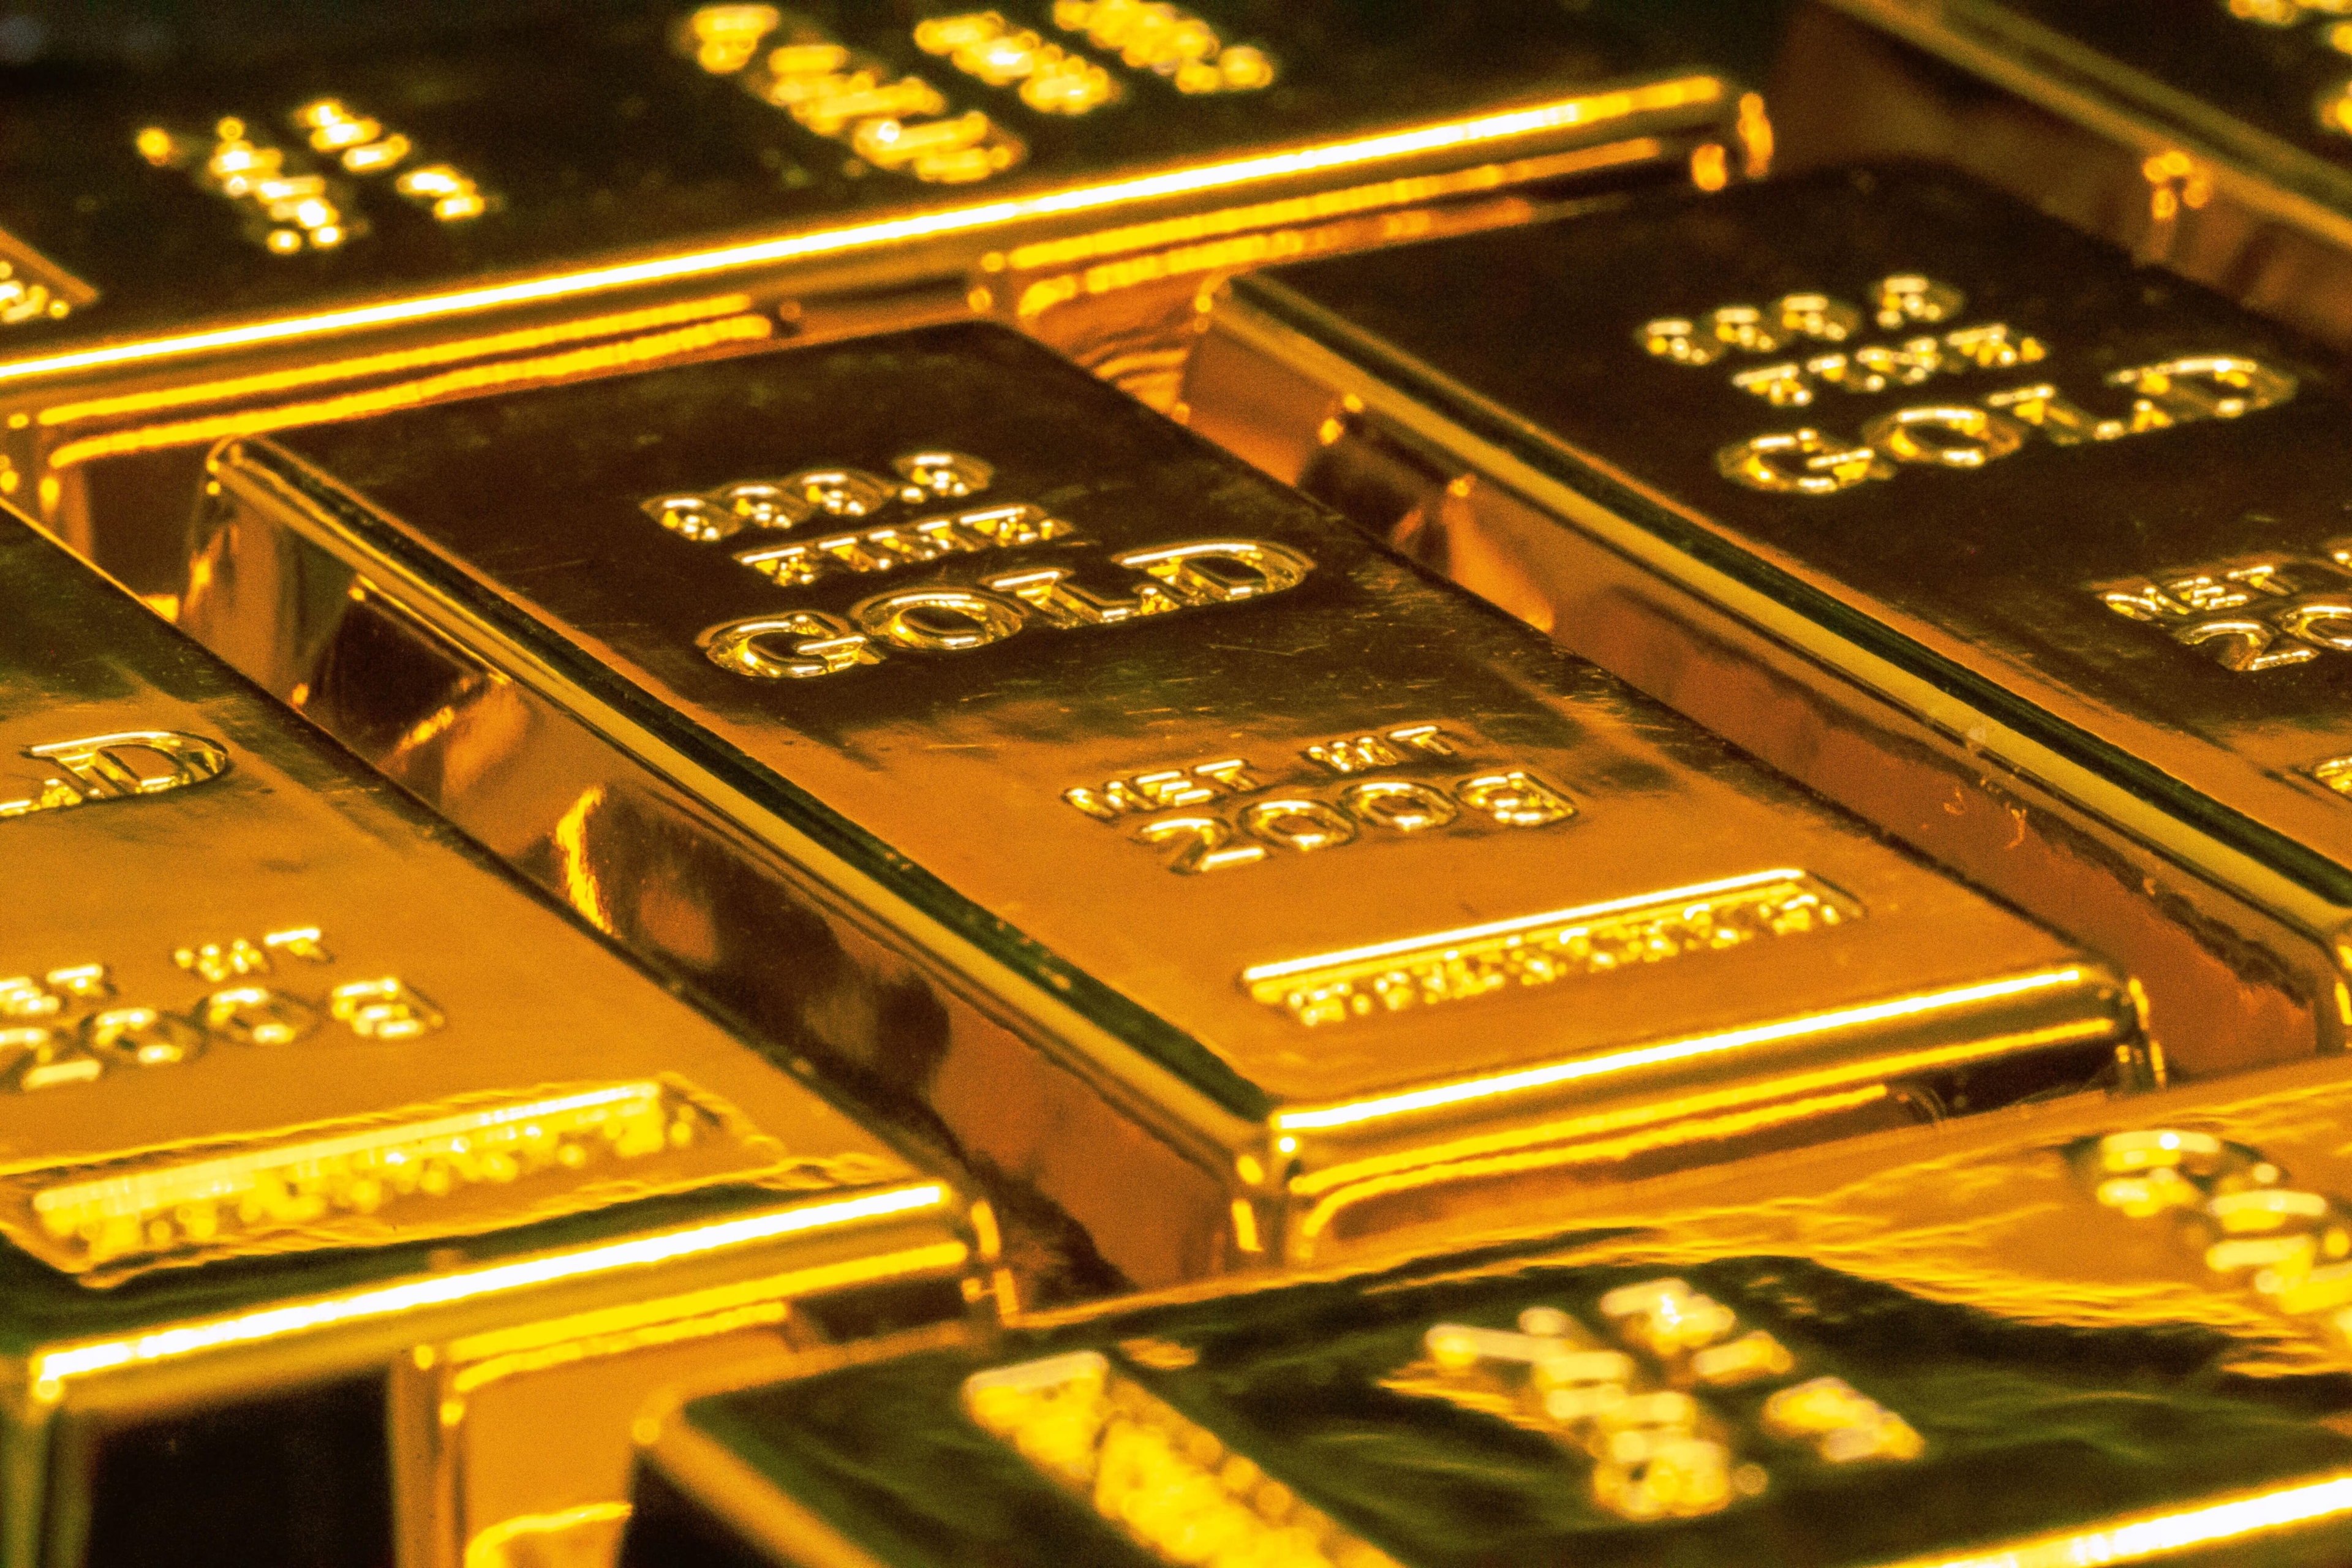 Gold traded volatile on March 31 and slipped from their highs amid gains in the dollar index and weakness in crude oil. Gold April futures contract settled almost flat at $1933.50 per troy ounce.